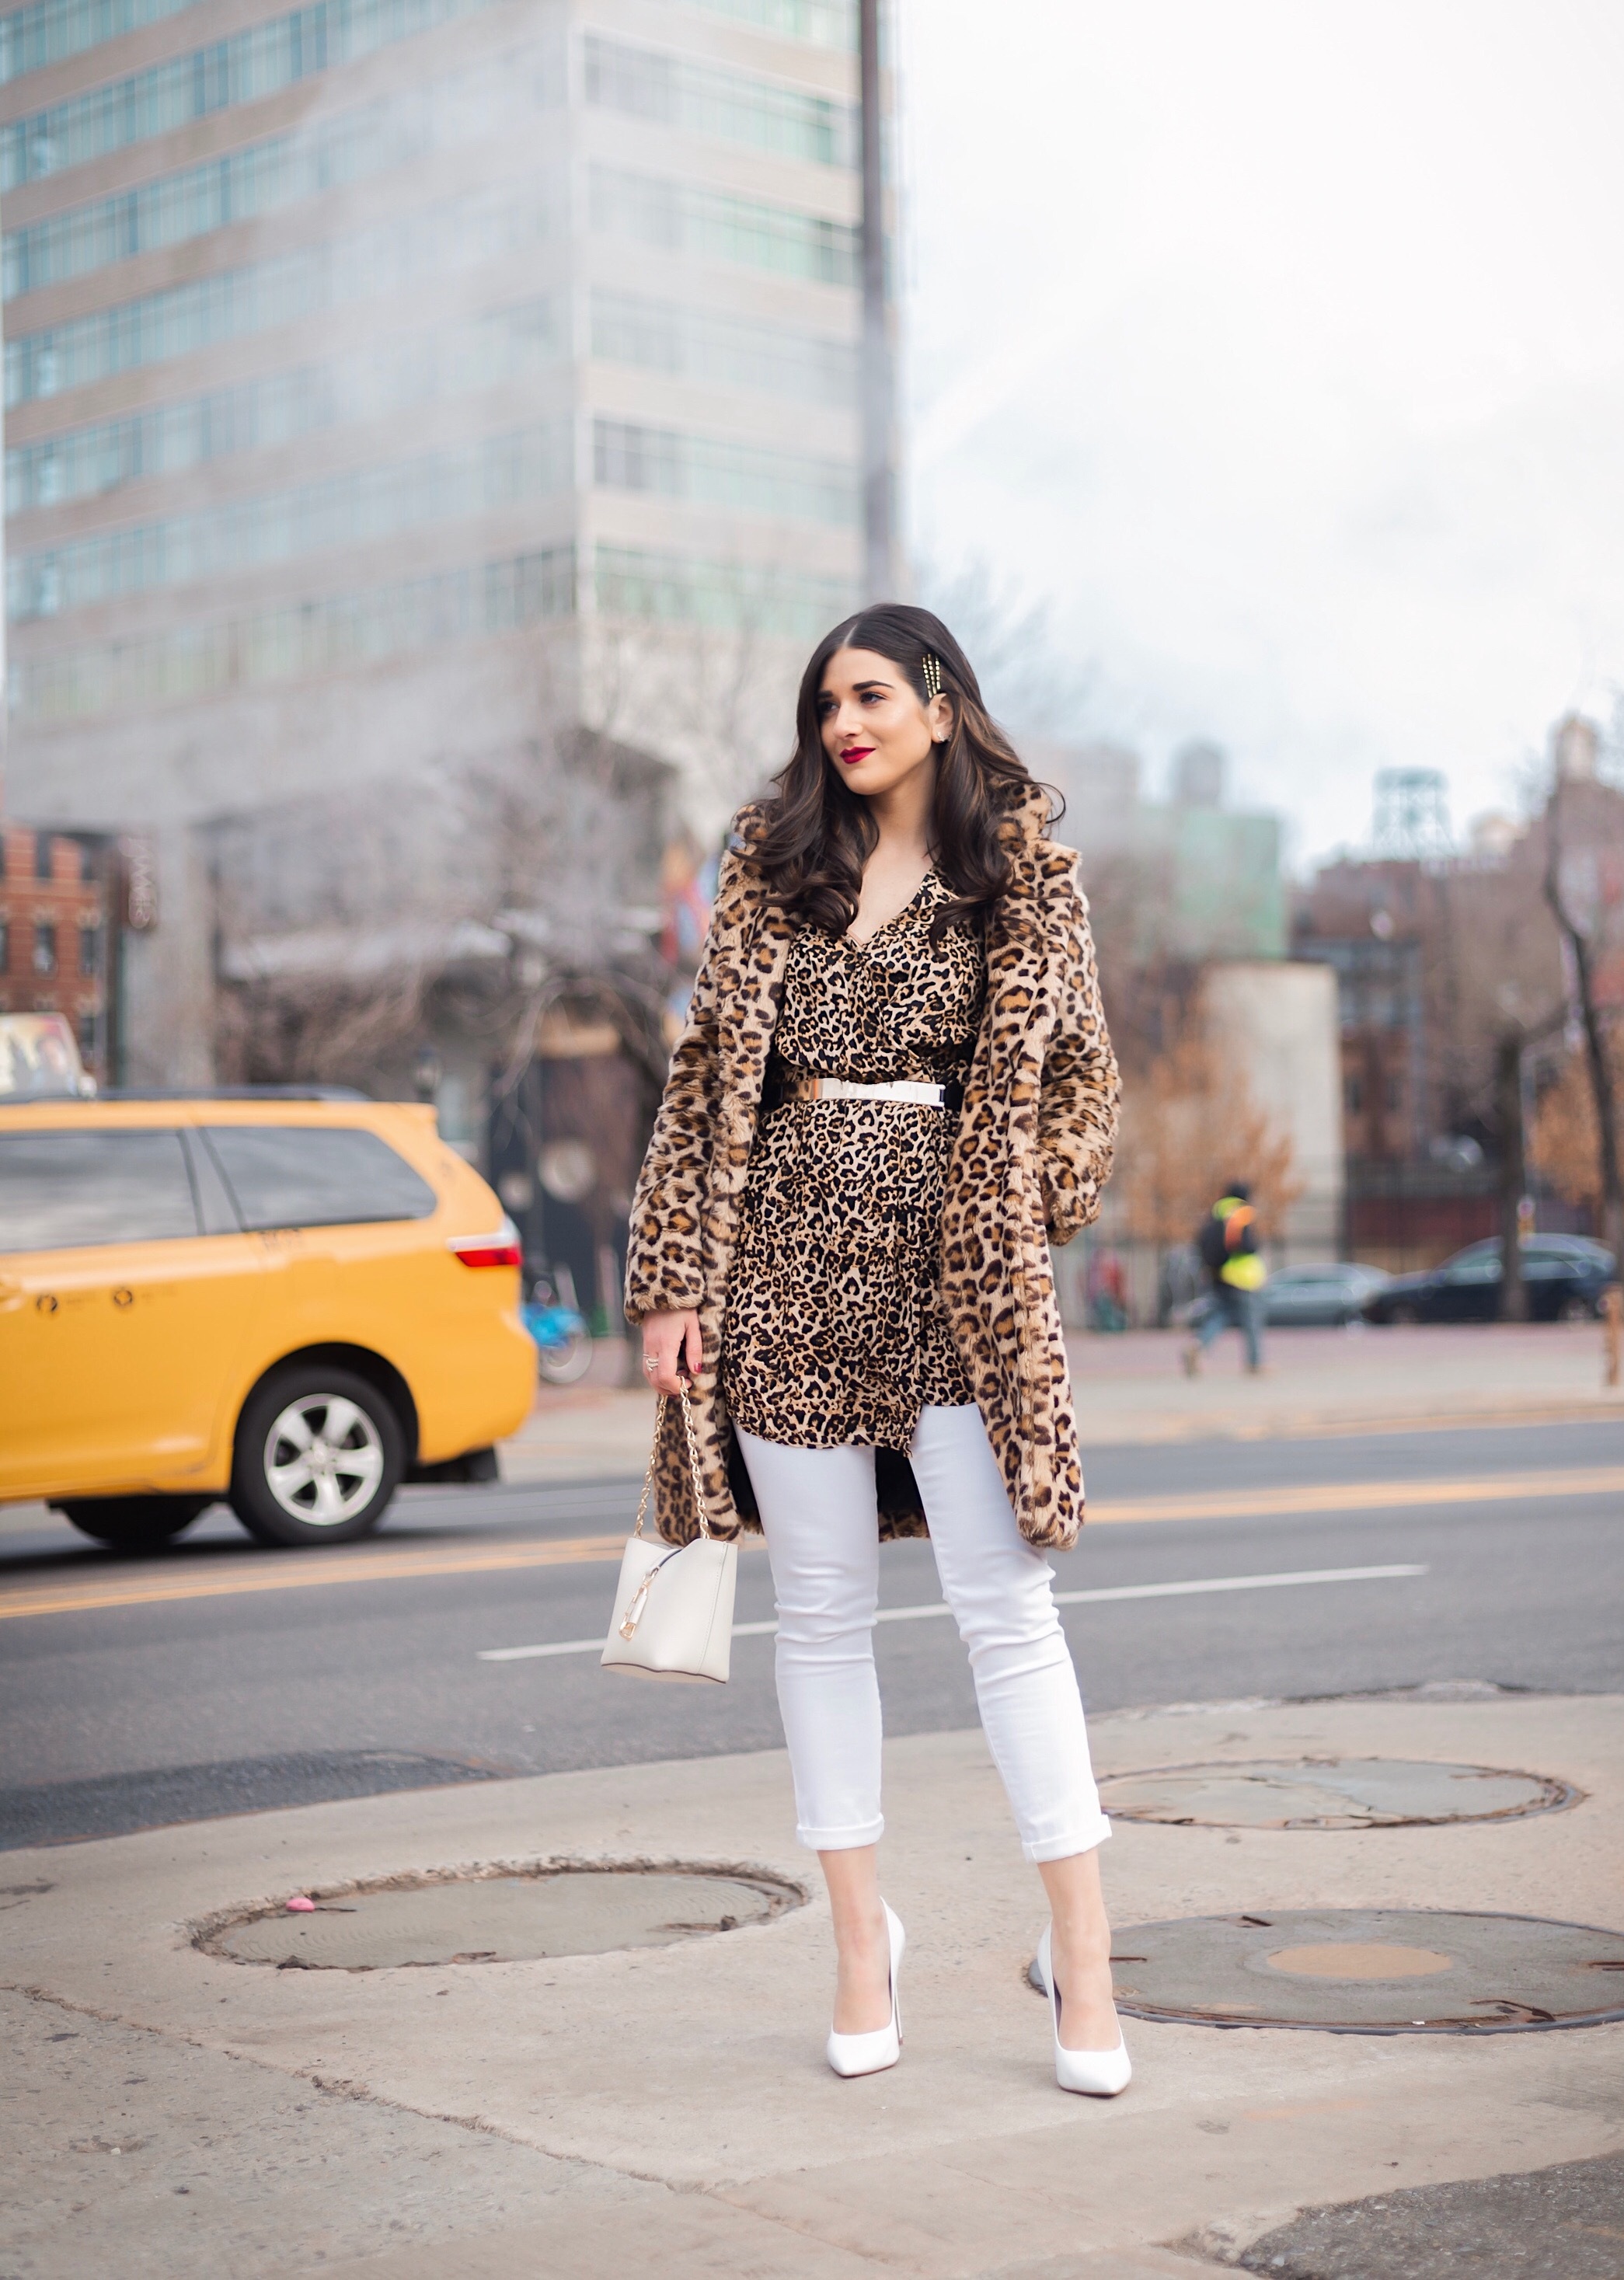 22 Cool Beige Skirt Outfits To Try - Styleoholic